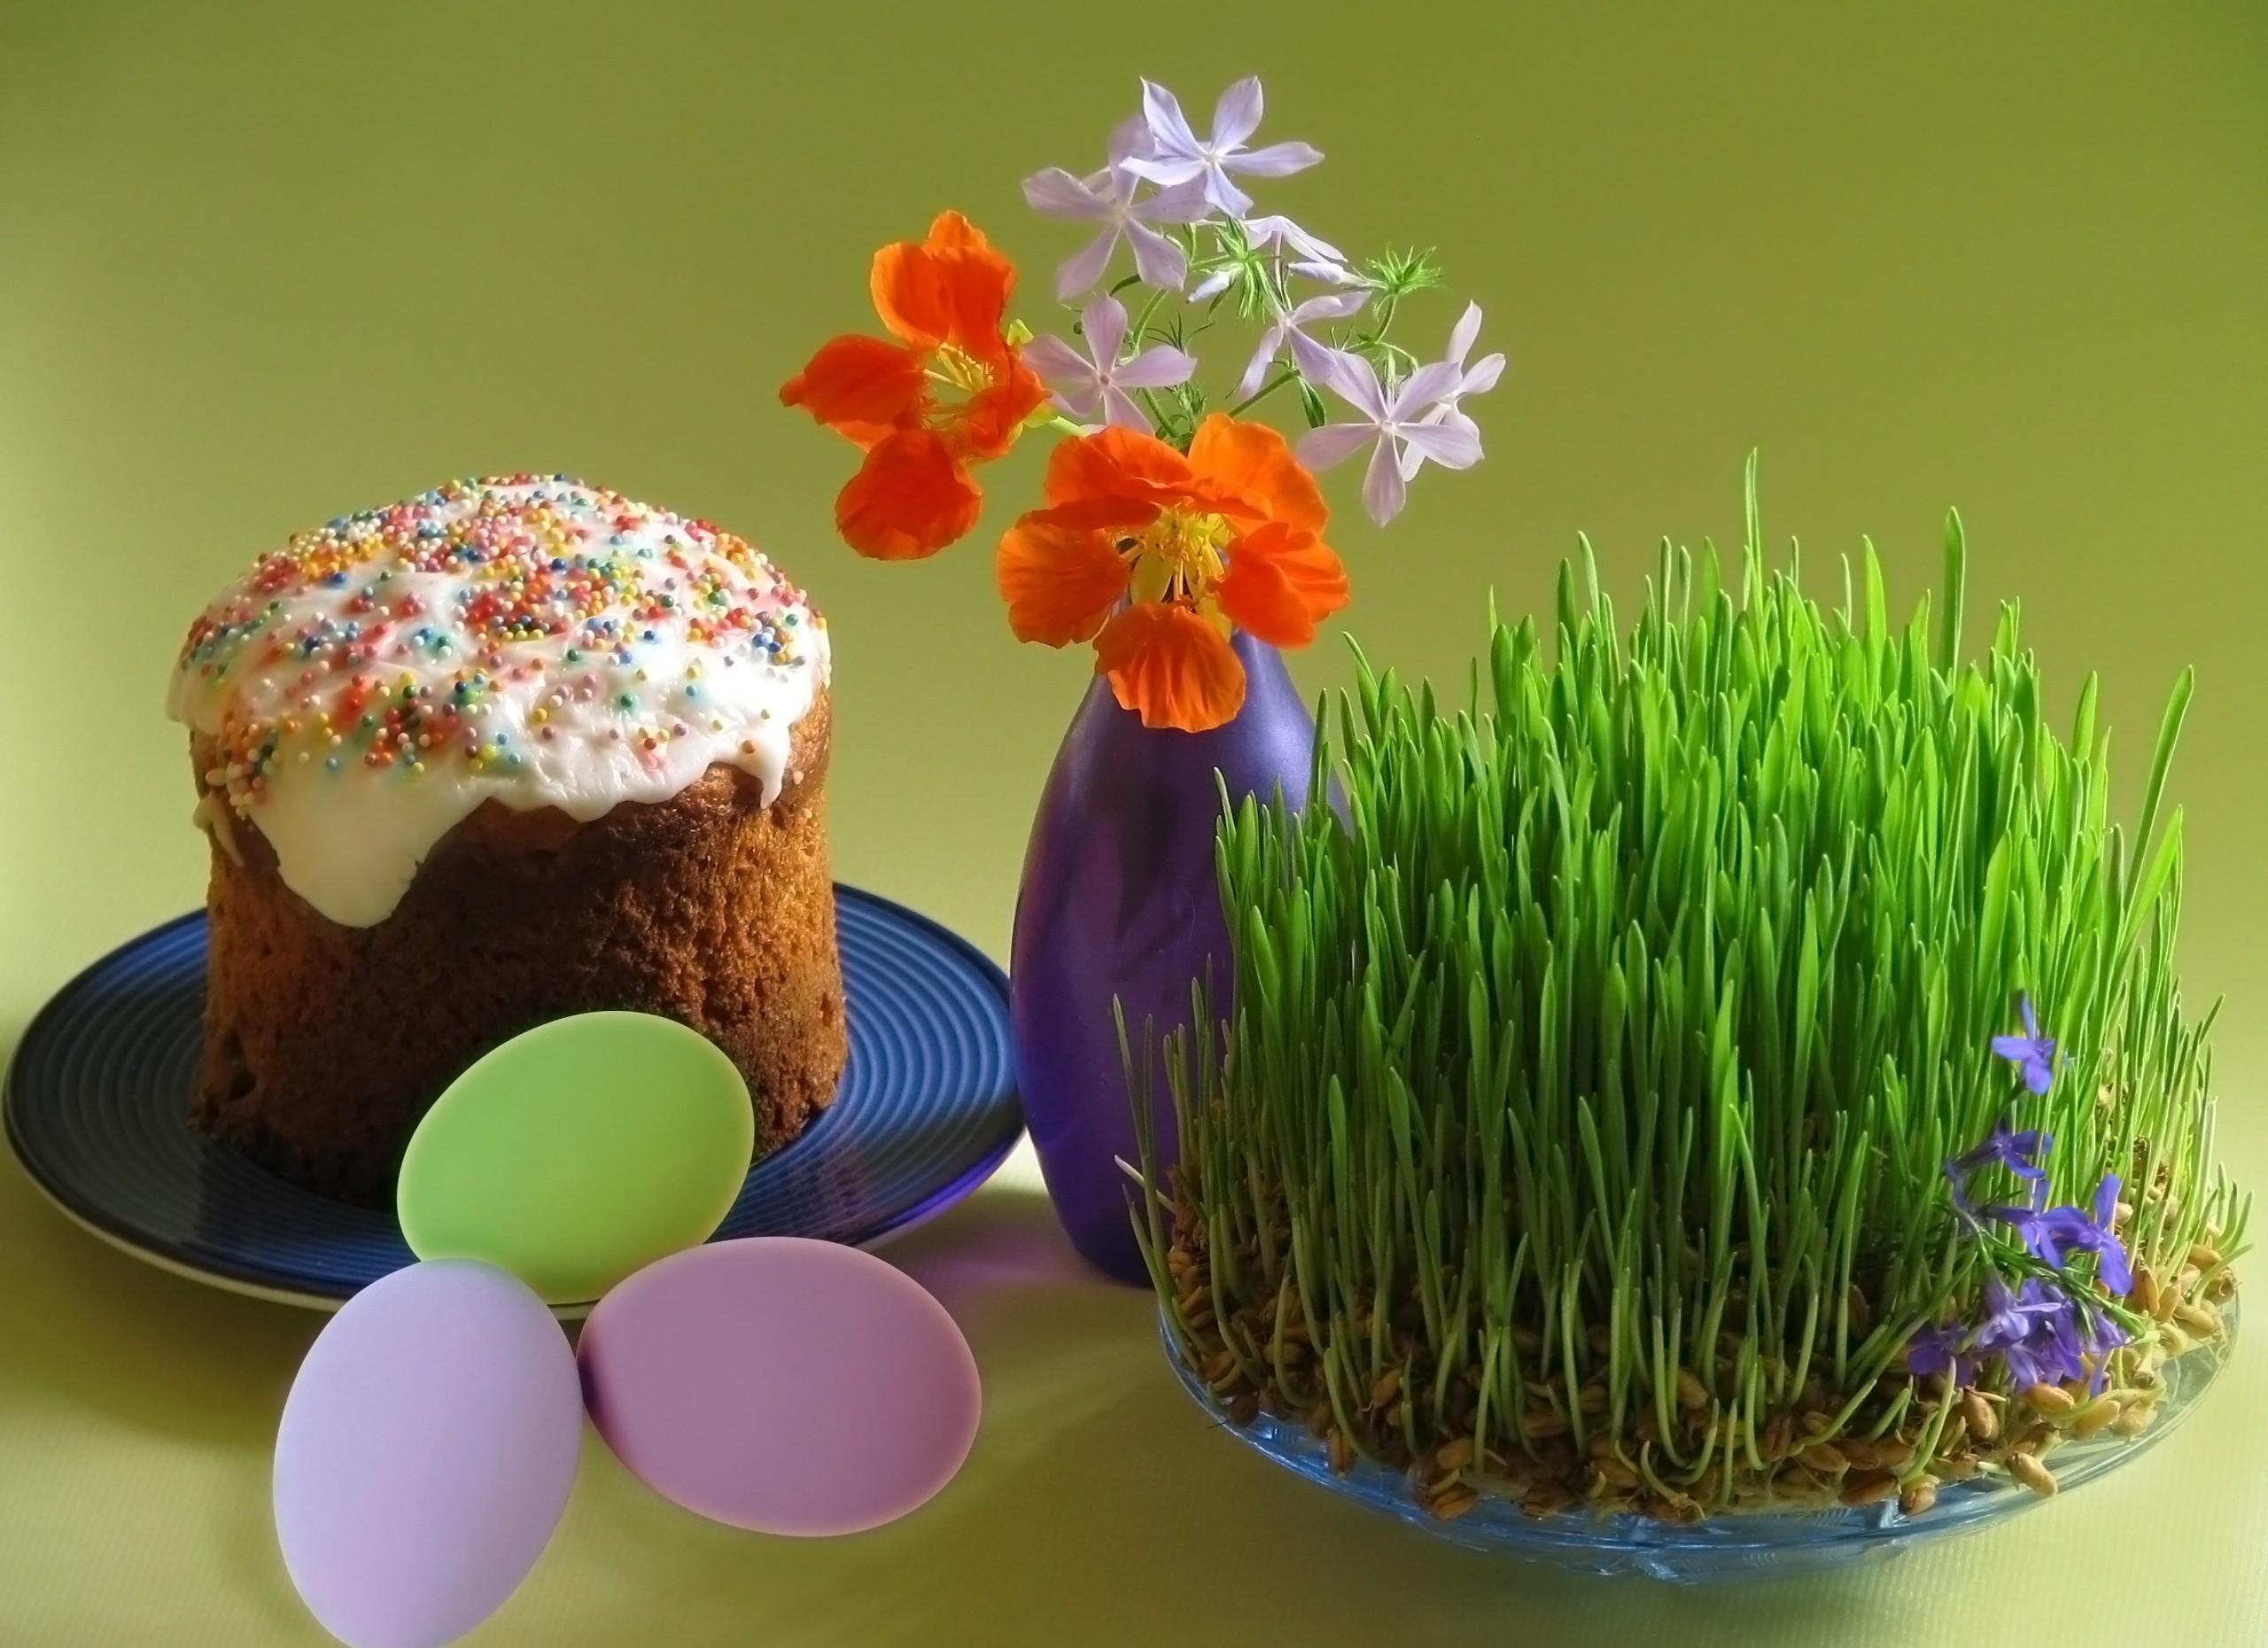 flowers, holidays, eggs, easter, holiday, cake, plate, vase, sprouts, kulich